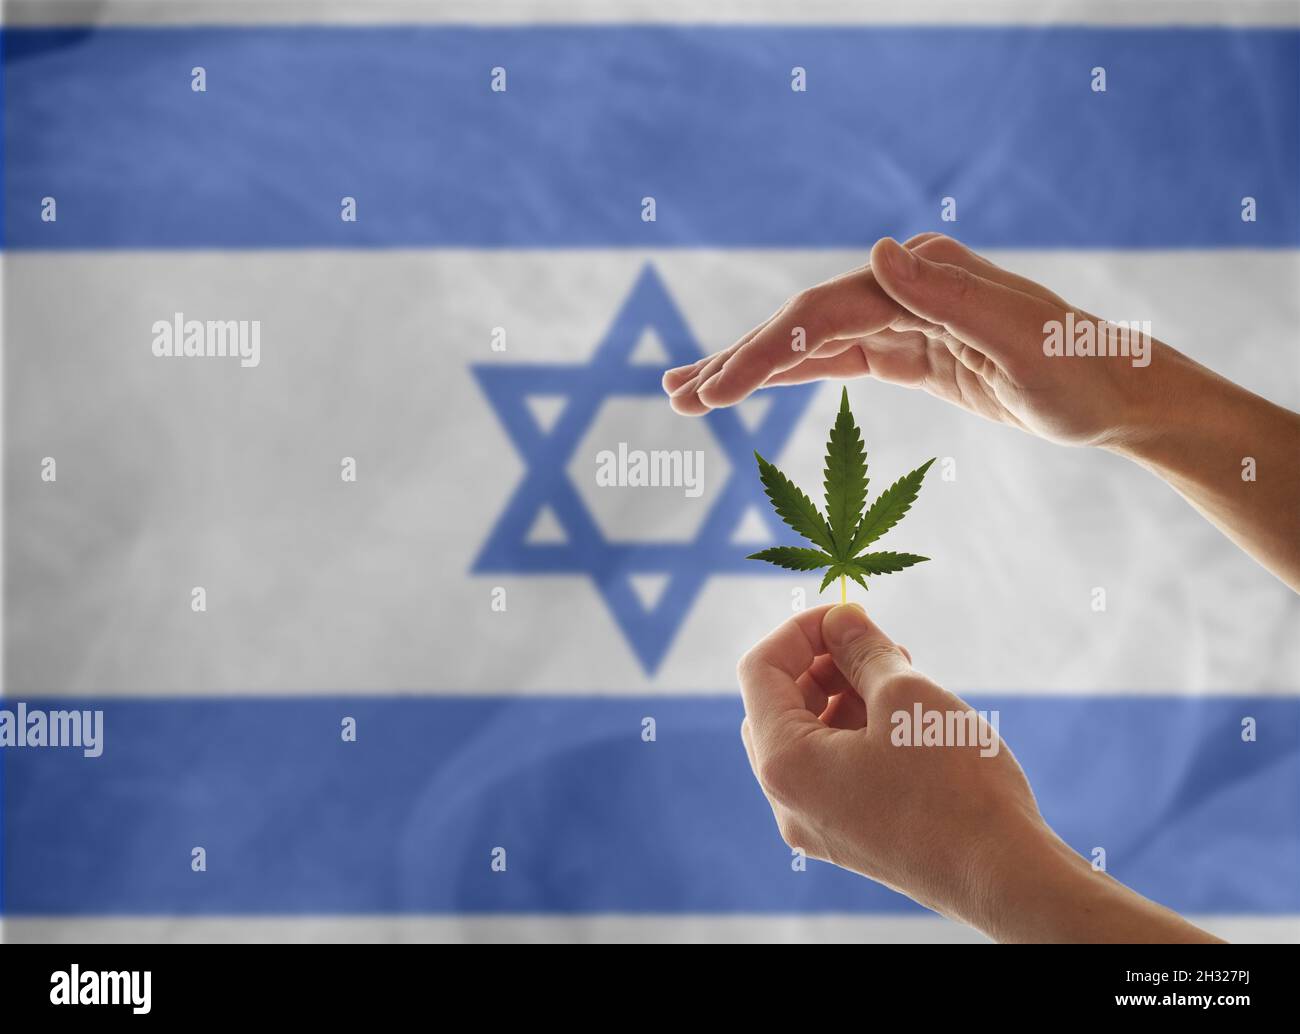 Woman's Hand Holding a Marijuana Leaf From a Medical Cannabis or CBD Hemp Plant on the background of the flag of Israel. Stock Photo